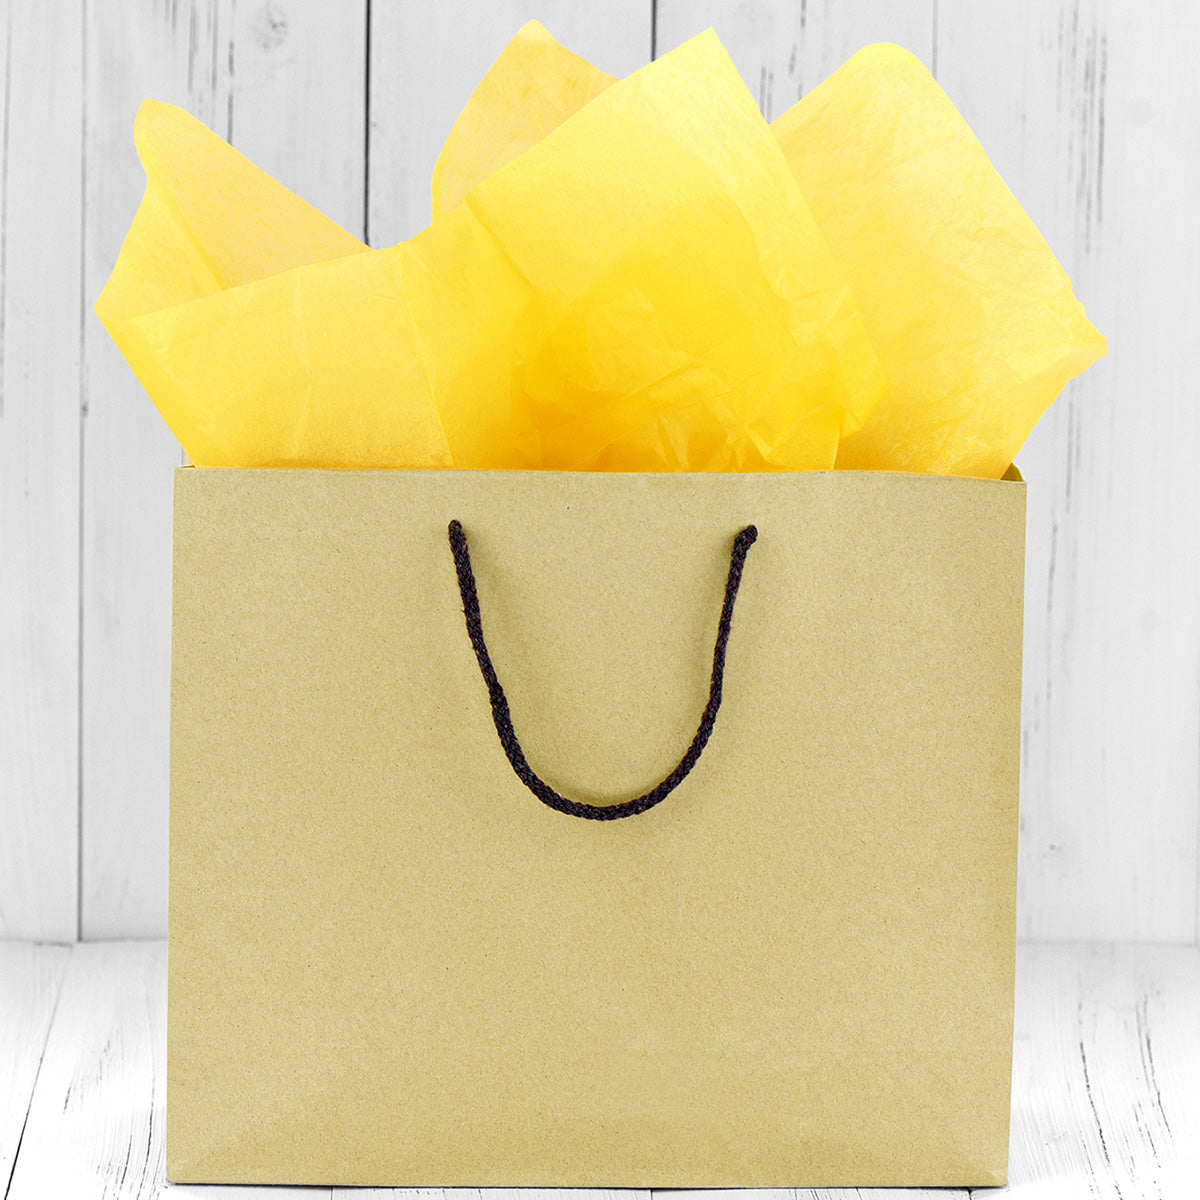 50 Sheets Dark Yellow Wrapping Tissue Paper